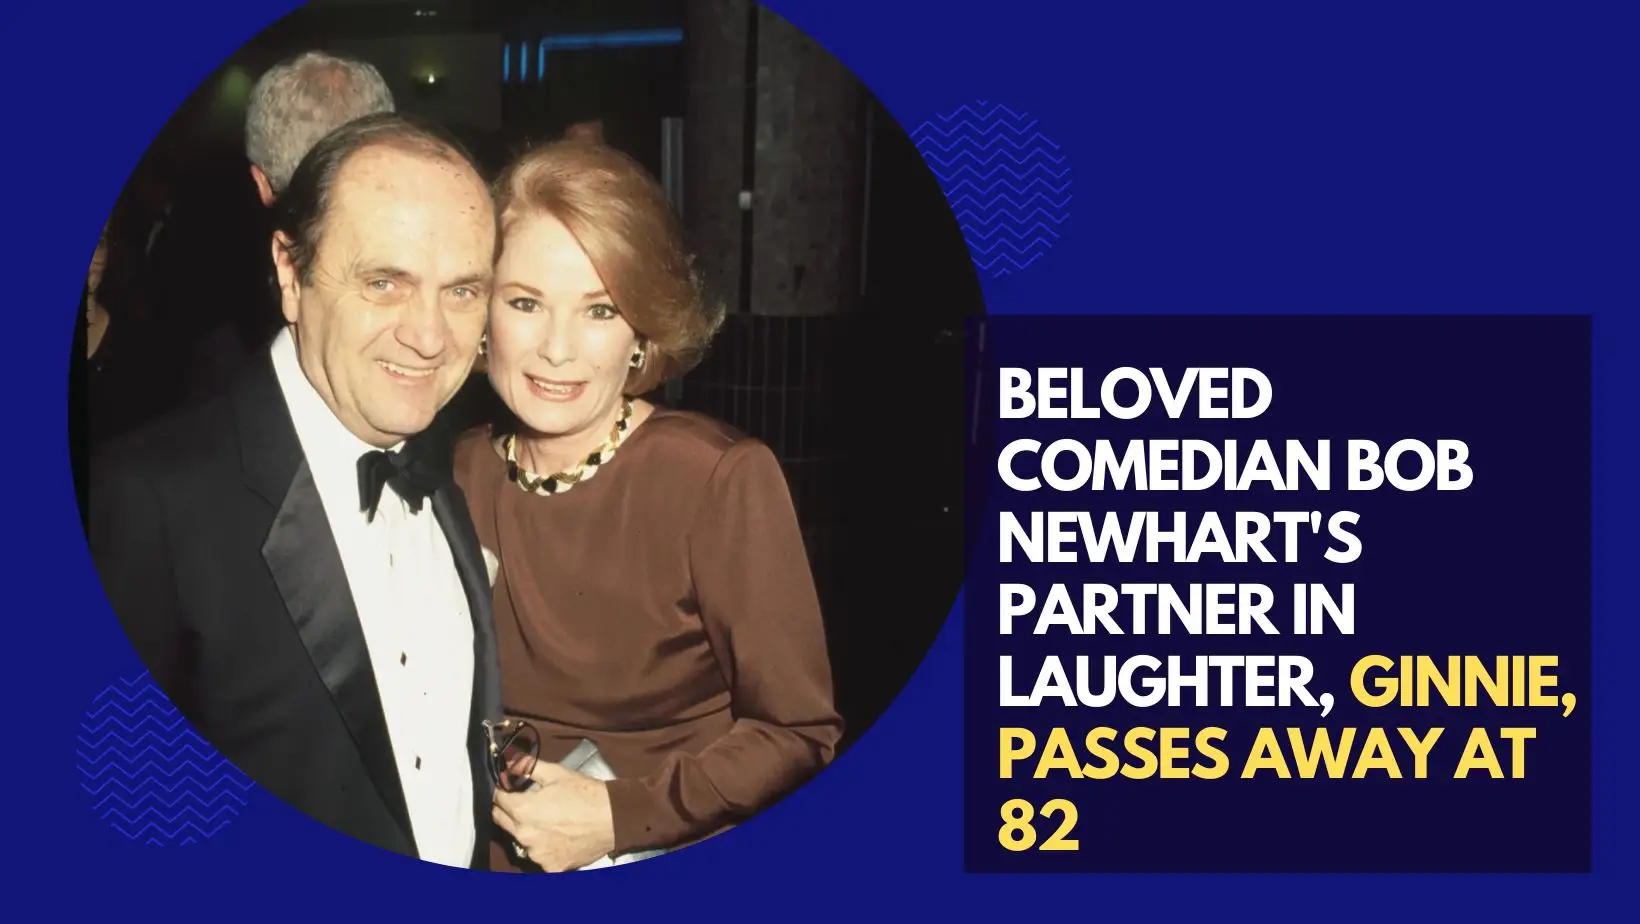 Beloved Comedian Bob Newhart's Partner in Laughter, Ginnie, Passes Away at 82